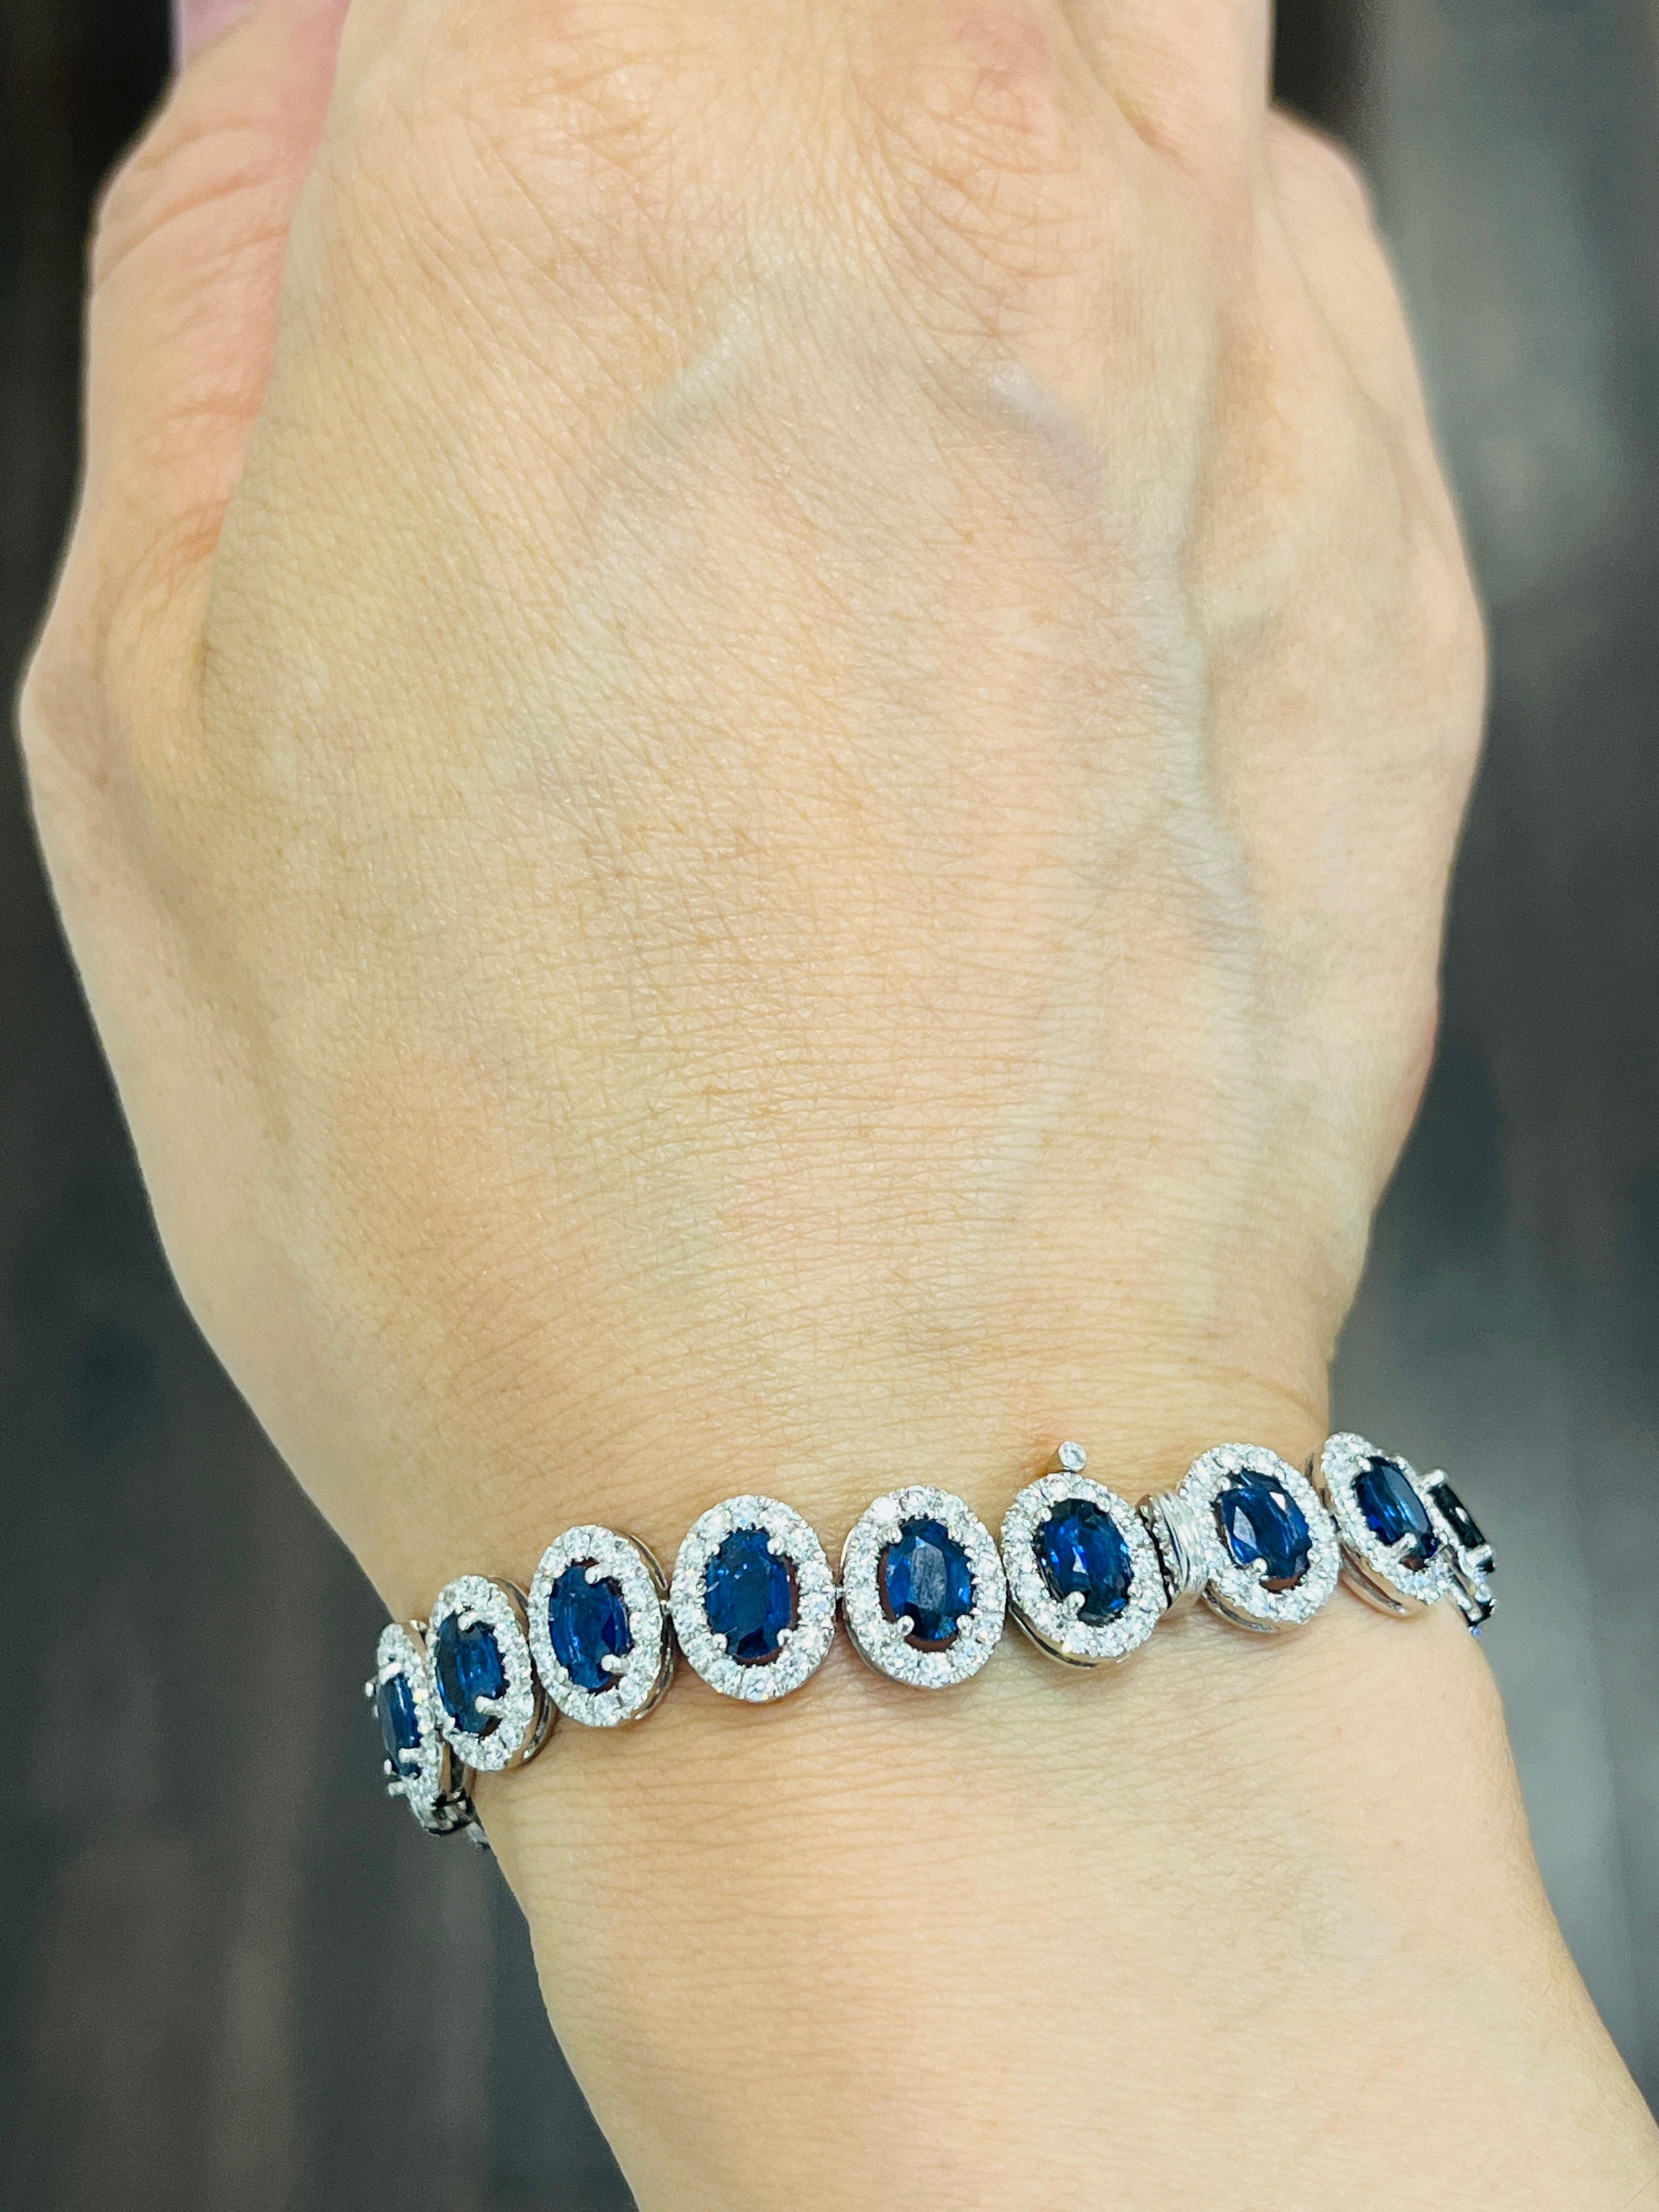 Oval Cut 17.48 ct Natural Sapphire and Diamond Bracelet For Sale